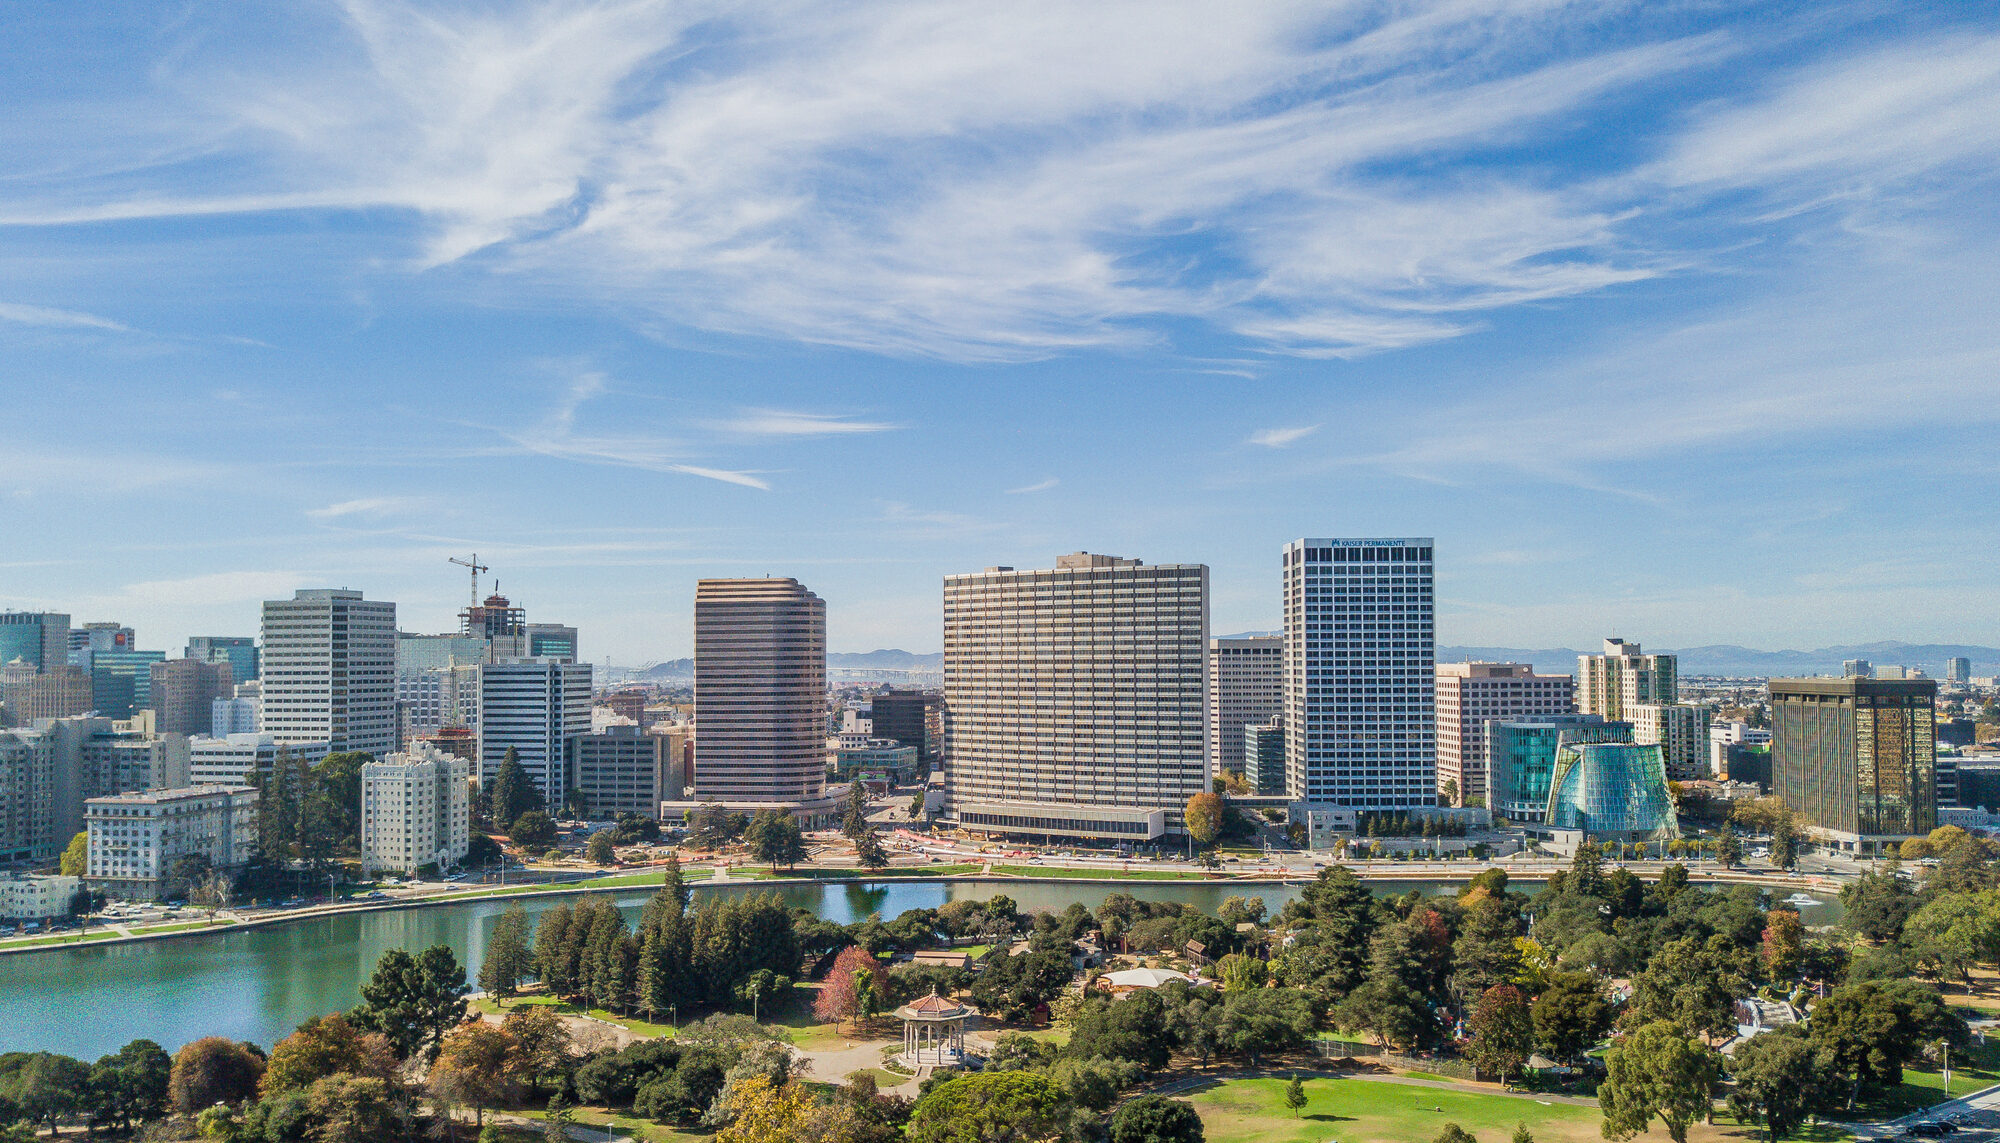 Aerial view of Oakland, California viewed from a tall vantage point above a city park with a pagoda in the middle. A green-blue lake sits in the middle of the photo, with thin clouds in a bright blue sky.